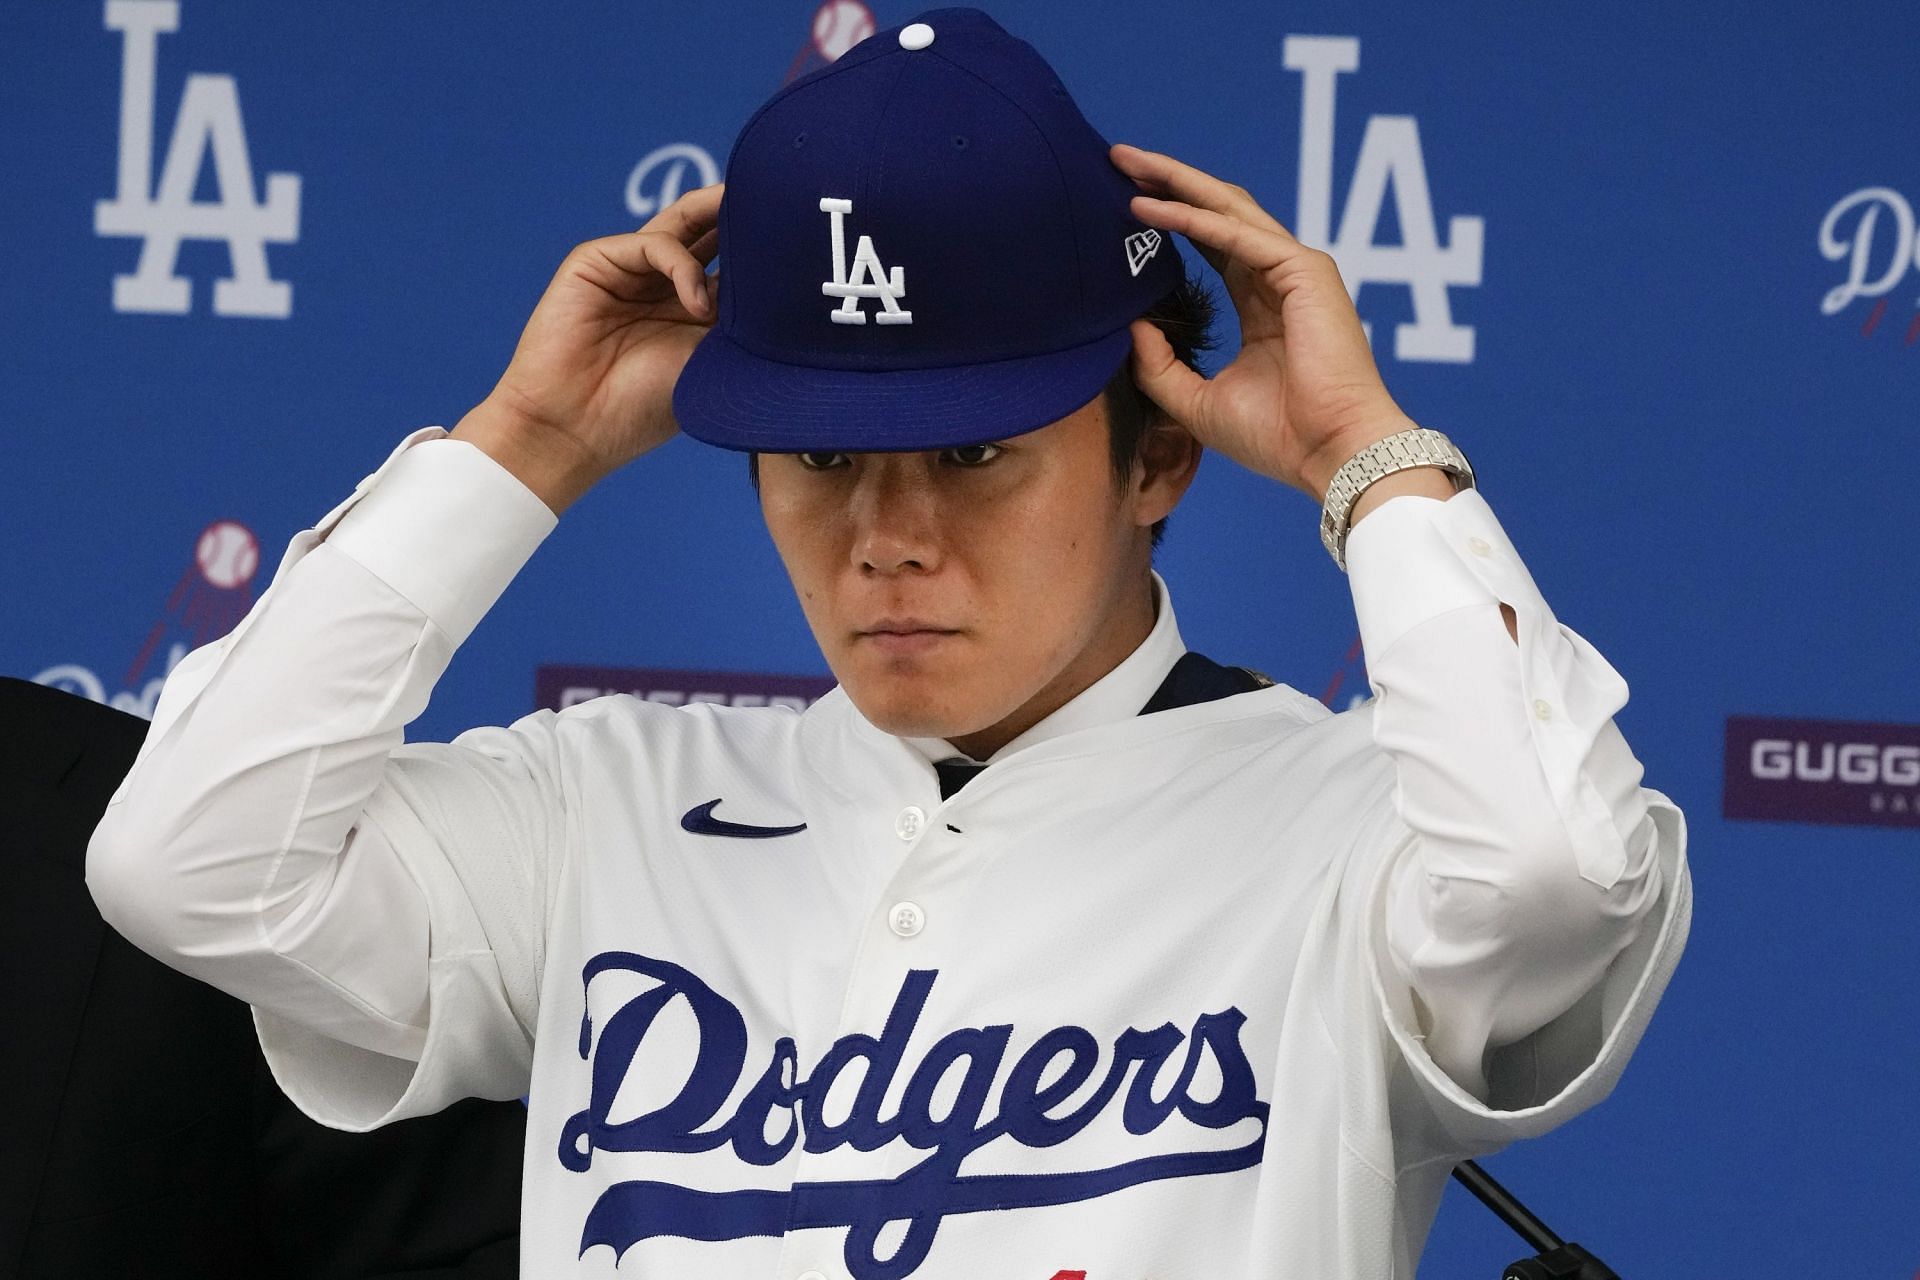 The LA Dodgers have secured a 12-year $325 million contract with sought-after free agent Yoshinobu Yamamoto.